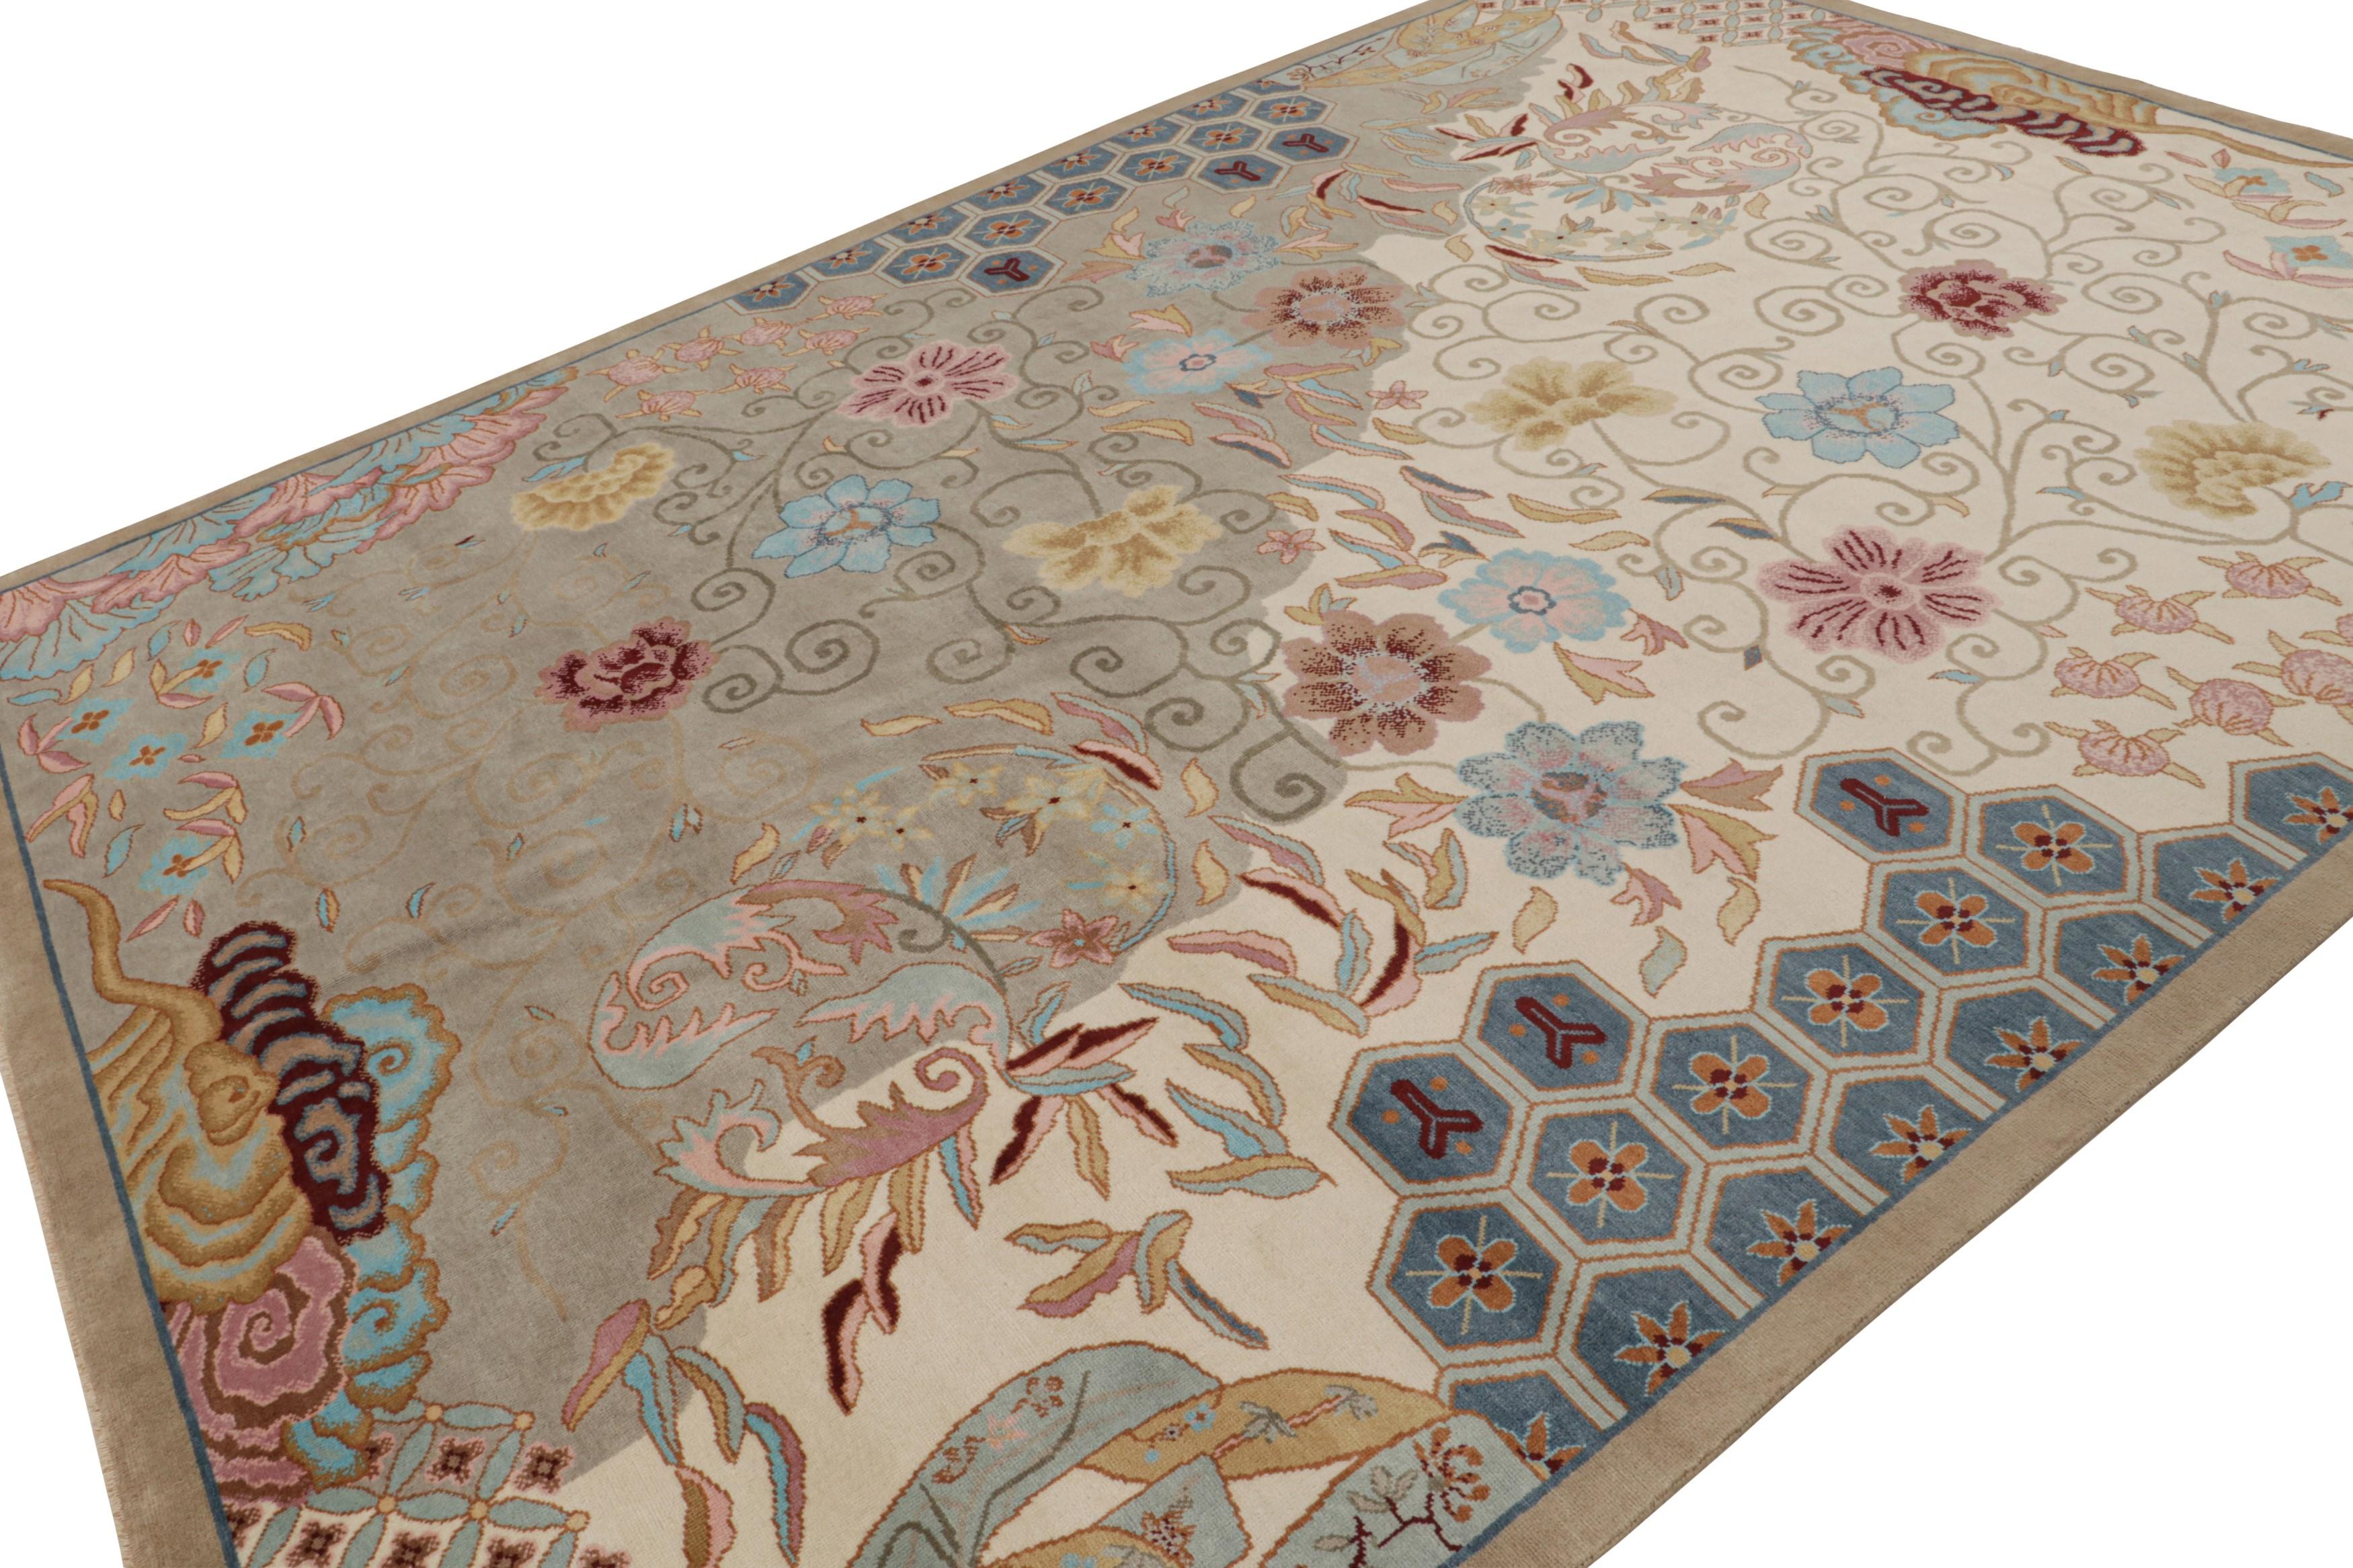 Hand knotted in wool, a 9x12 Chinese art deco style rug inspired by rare period pieces of the 1920s Nichols style. 

On the Design: 

The design boasts an all over floral pattern in tones of gray, white & blue. Keen eyes will admire the fine